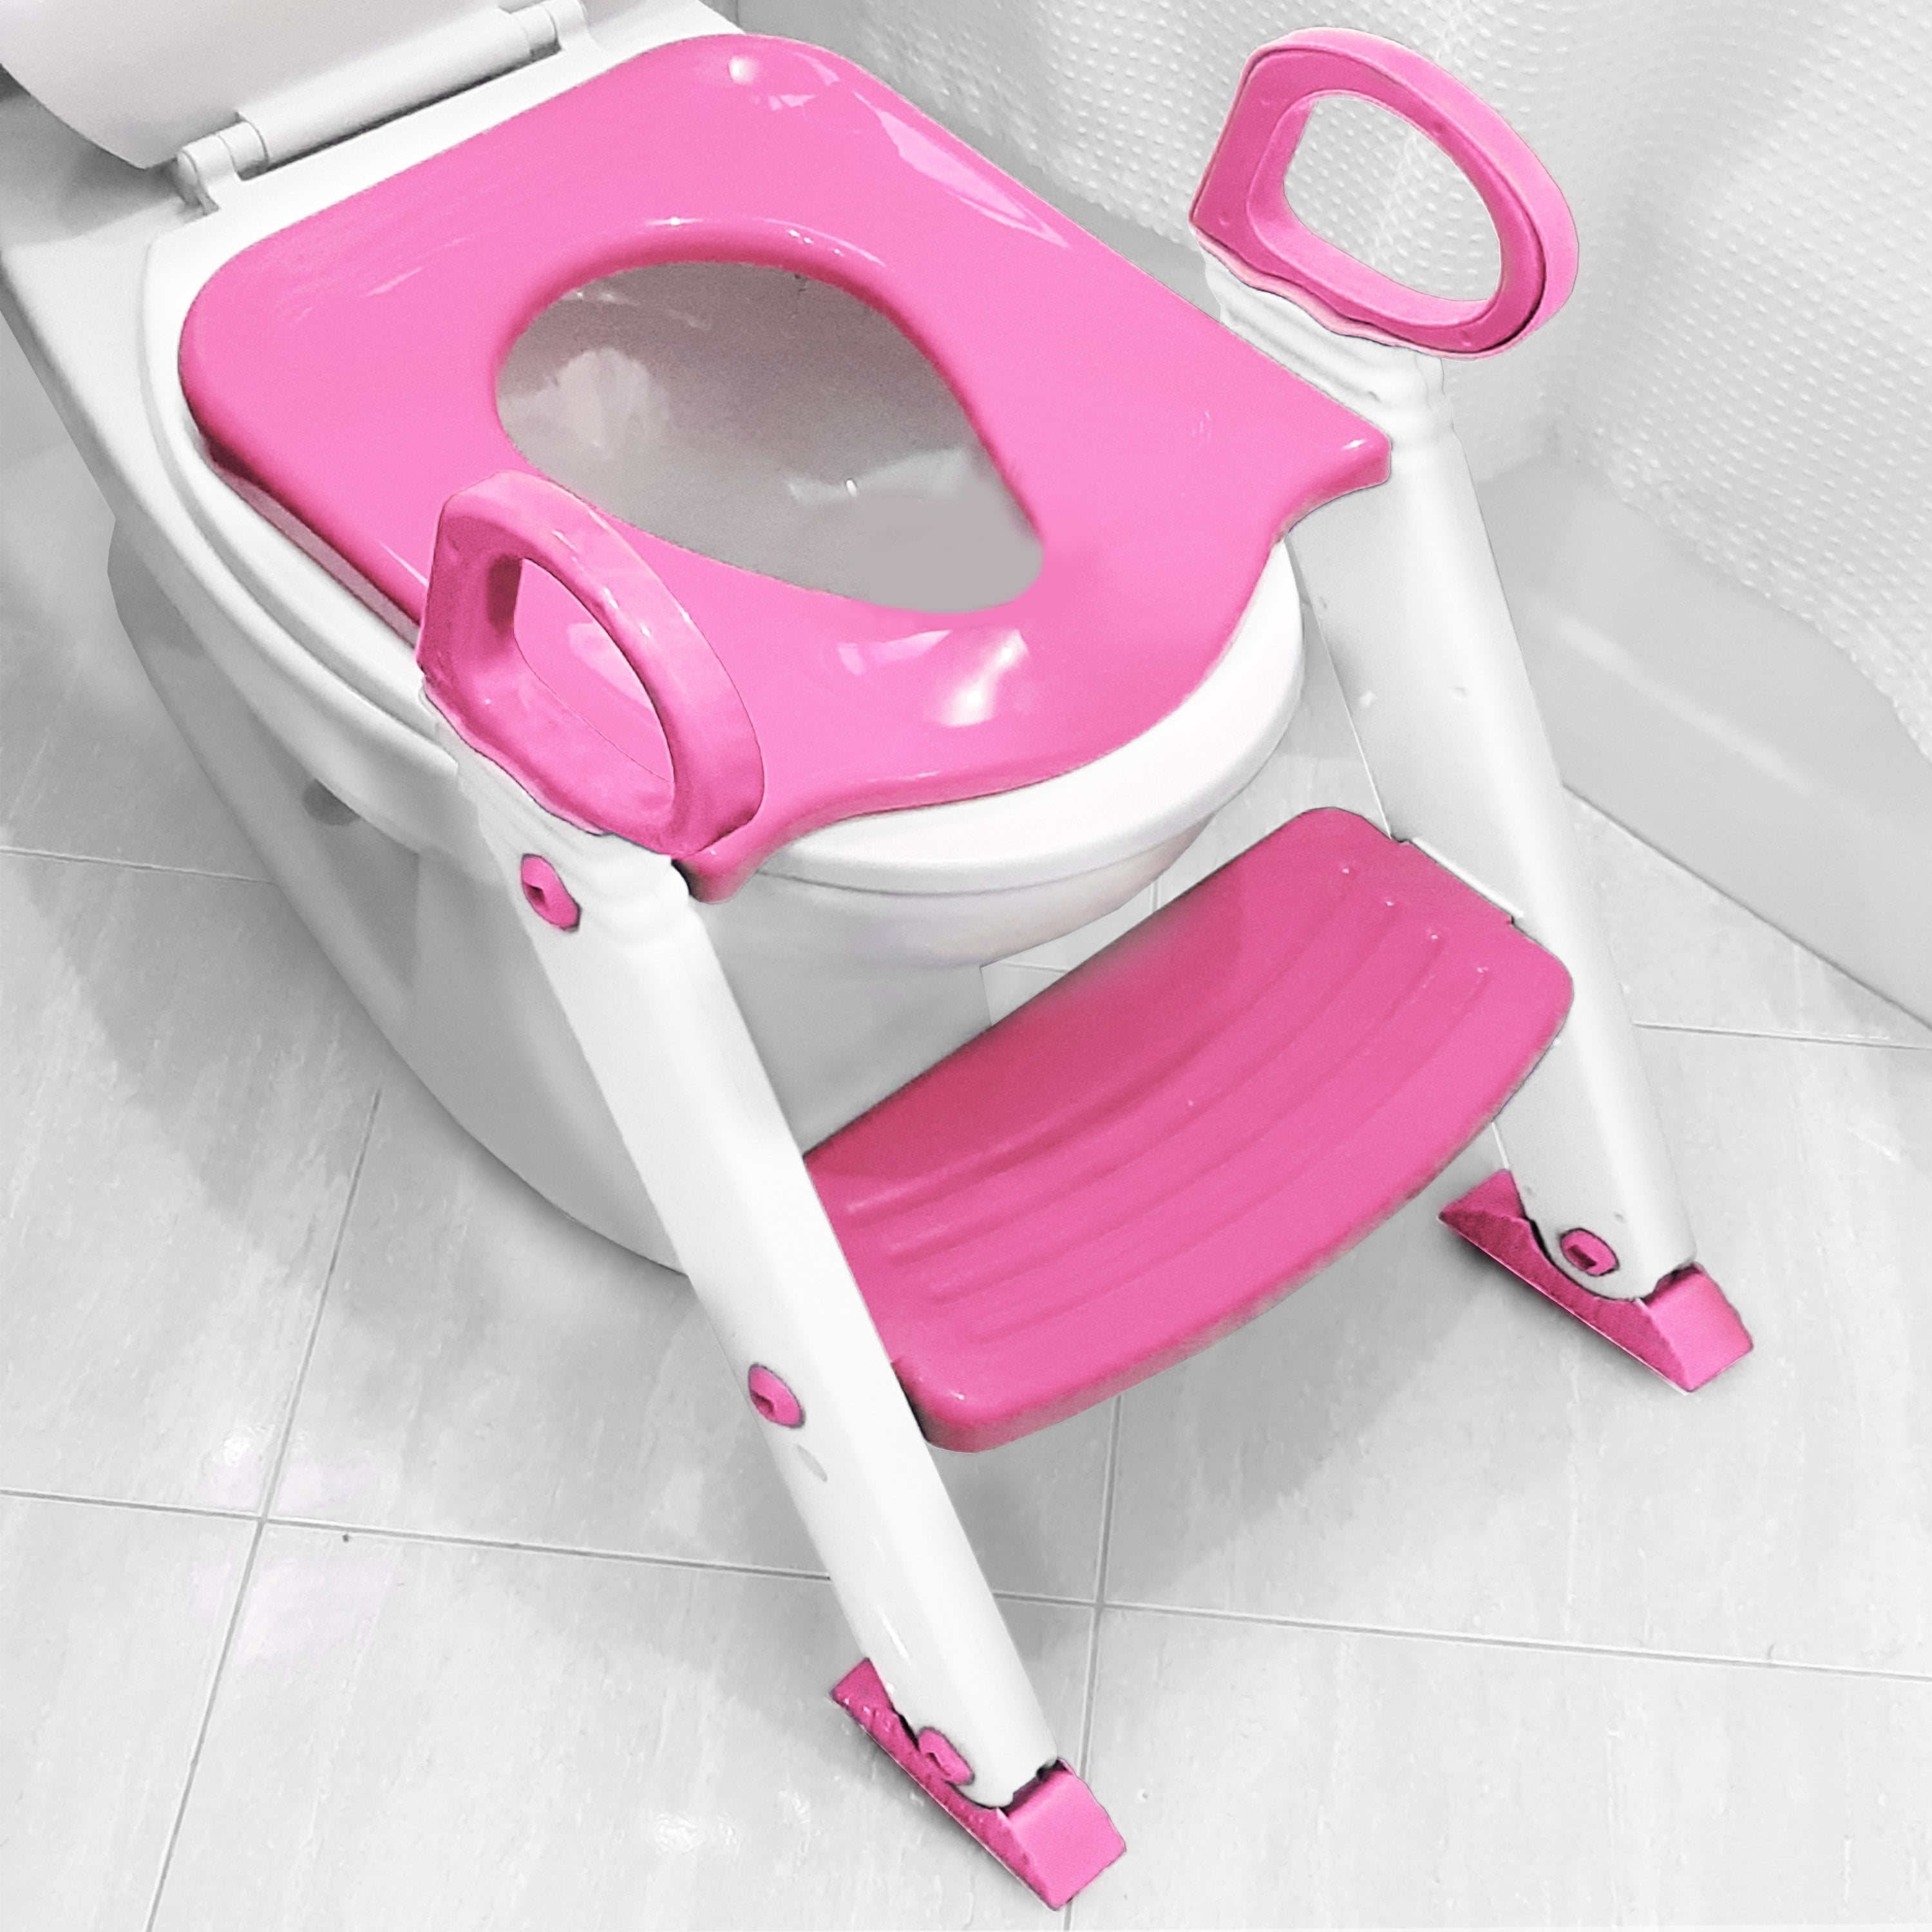 Foldable Toddler Toilet Chair Pot Training Seat with Step Stool Ladder Bathroom Supplies 